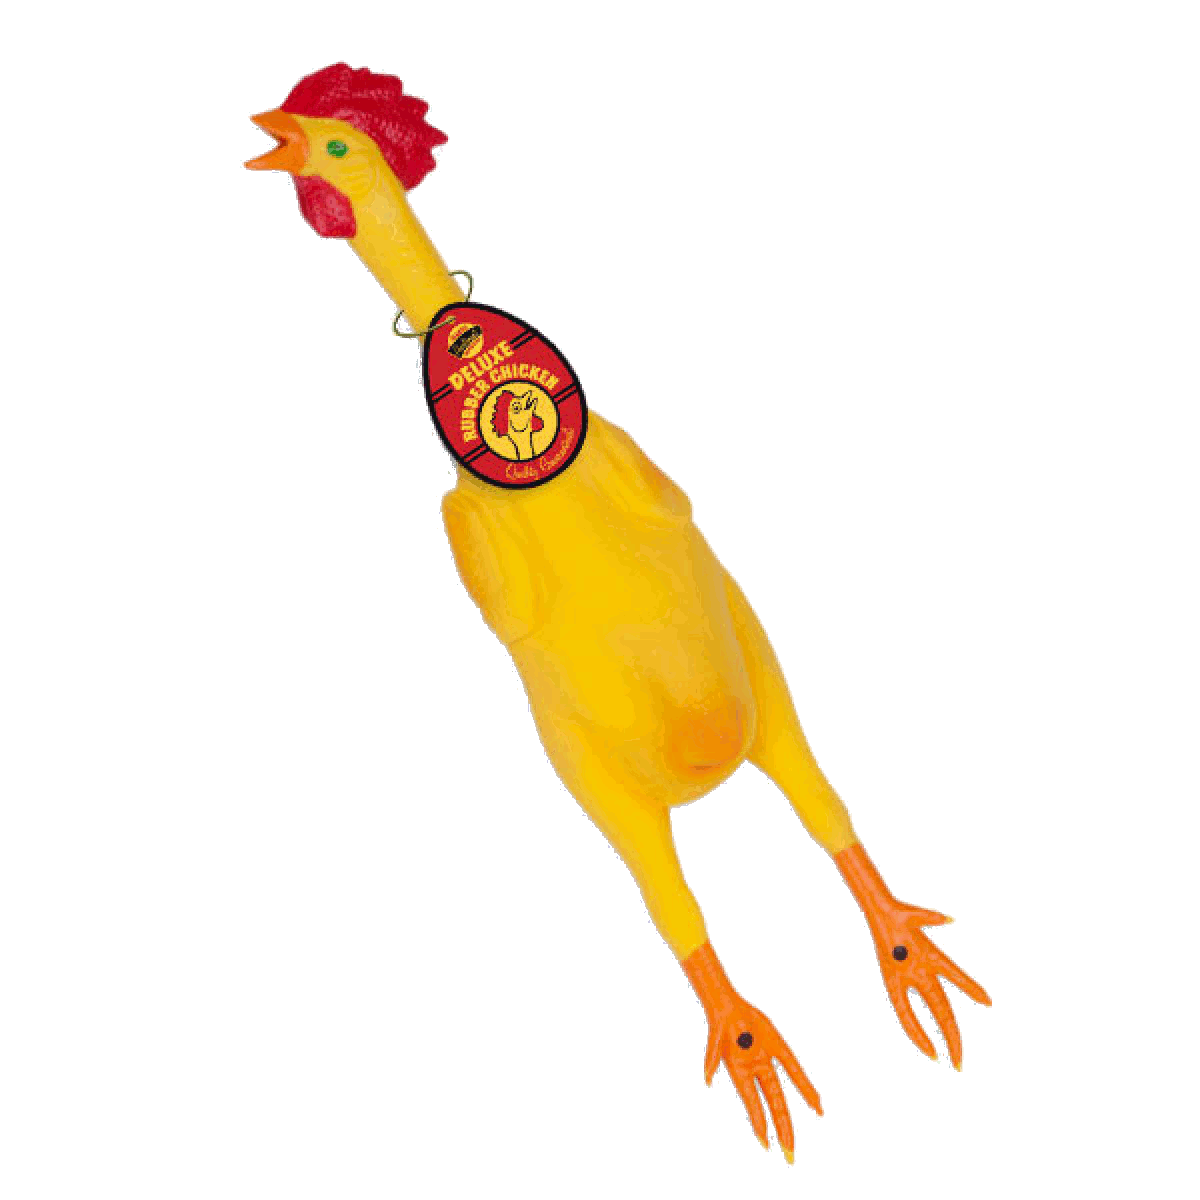 Deluxe Rubber Chicken from Archie McPhee